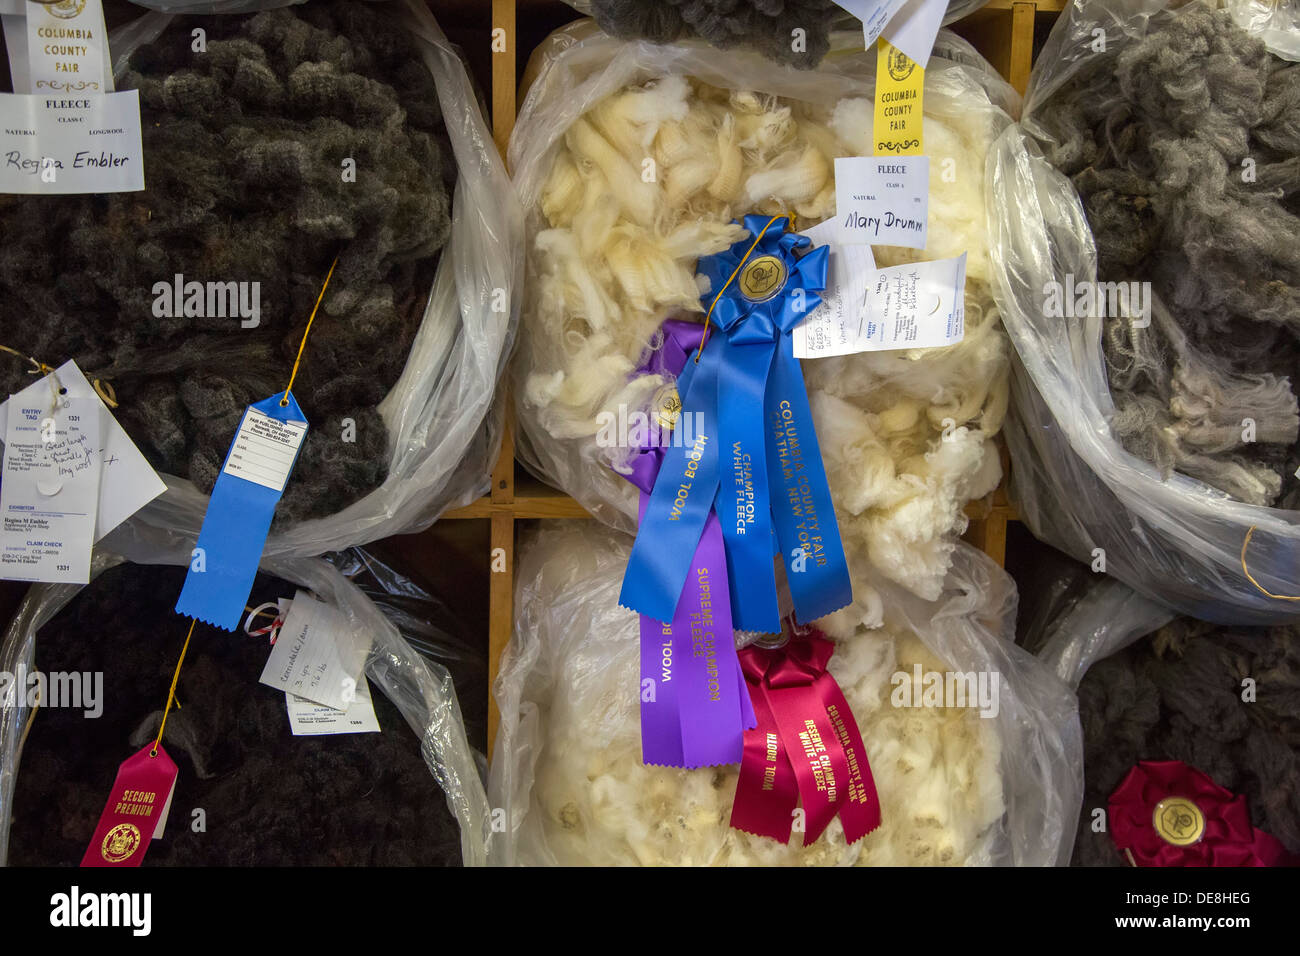 Chatham, New York - Prize-winning wool at the Columbia County Fair. Stock Photo